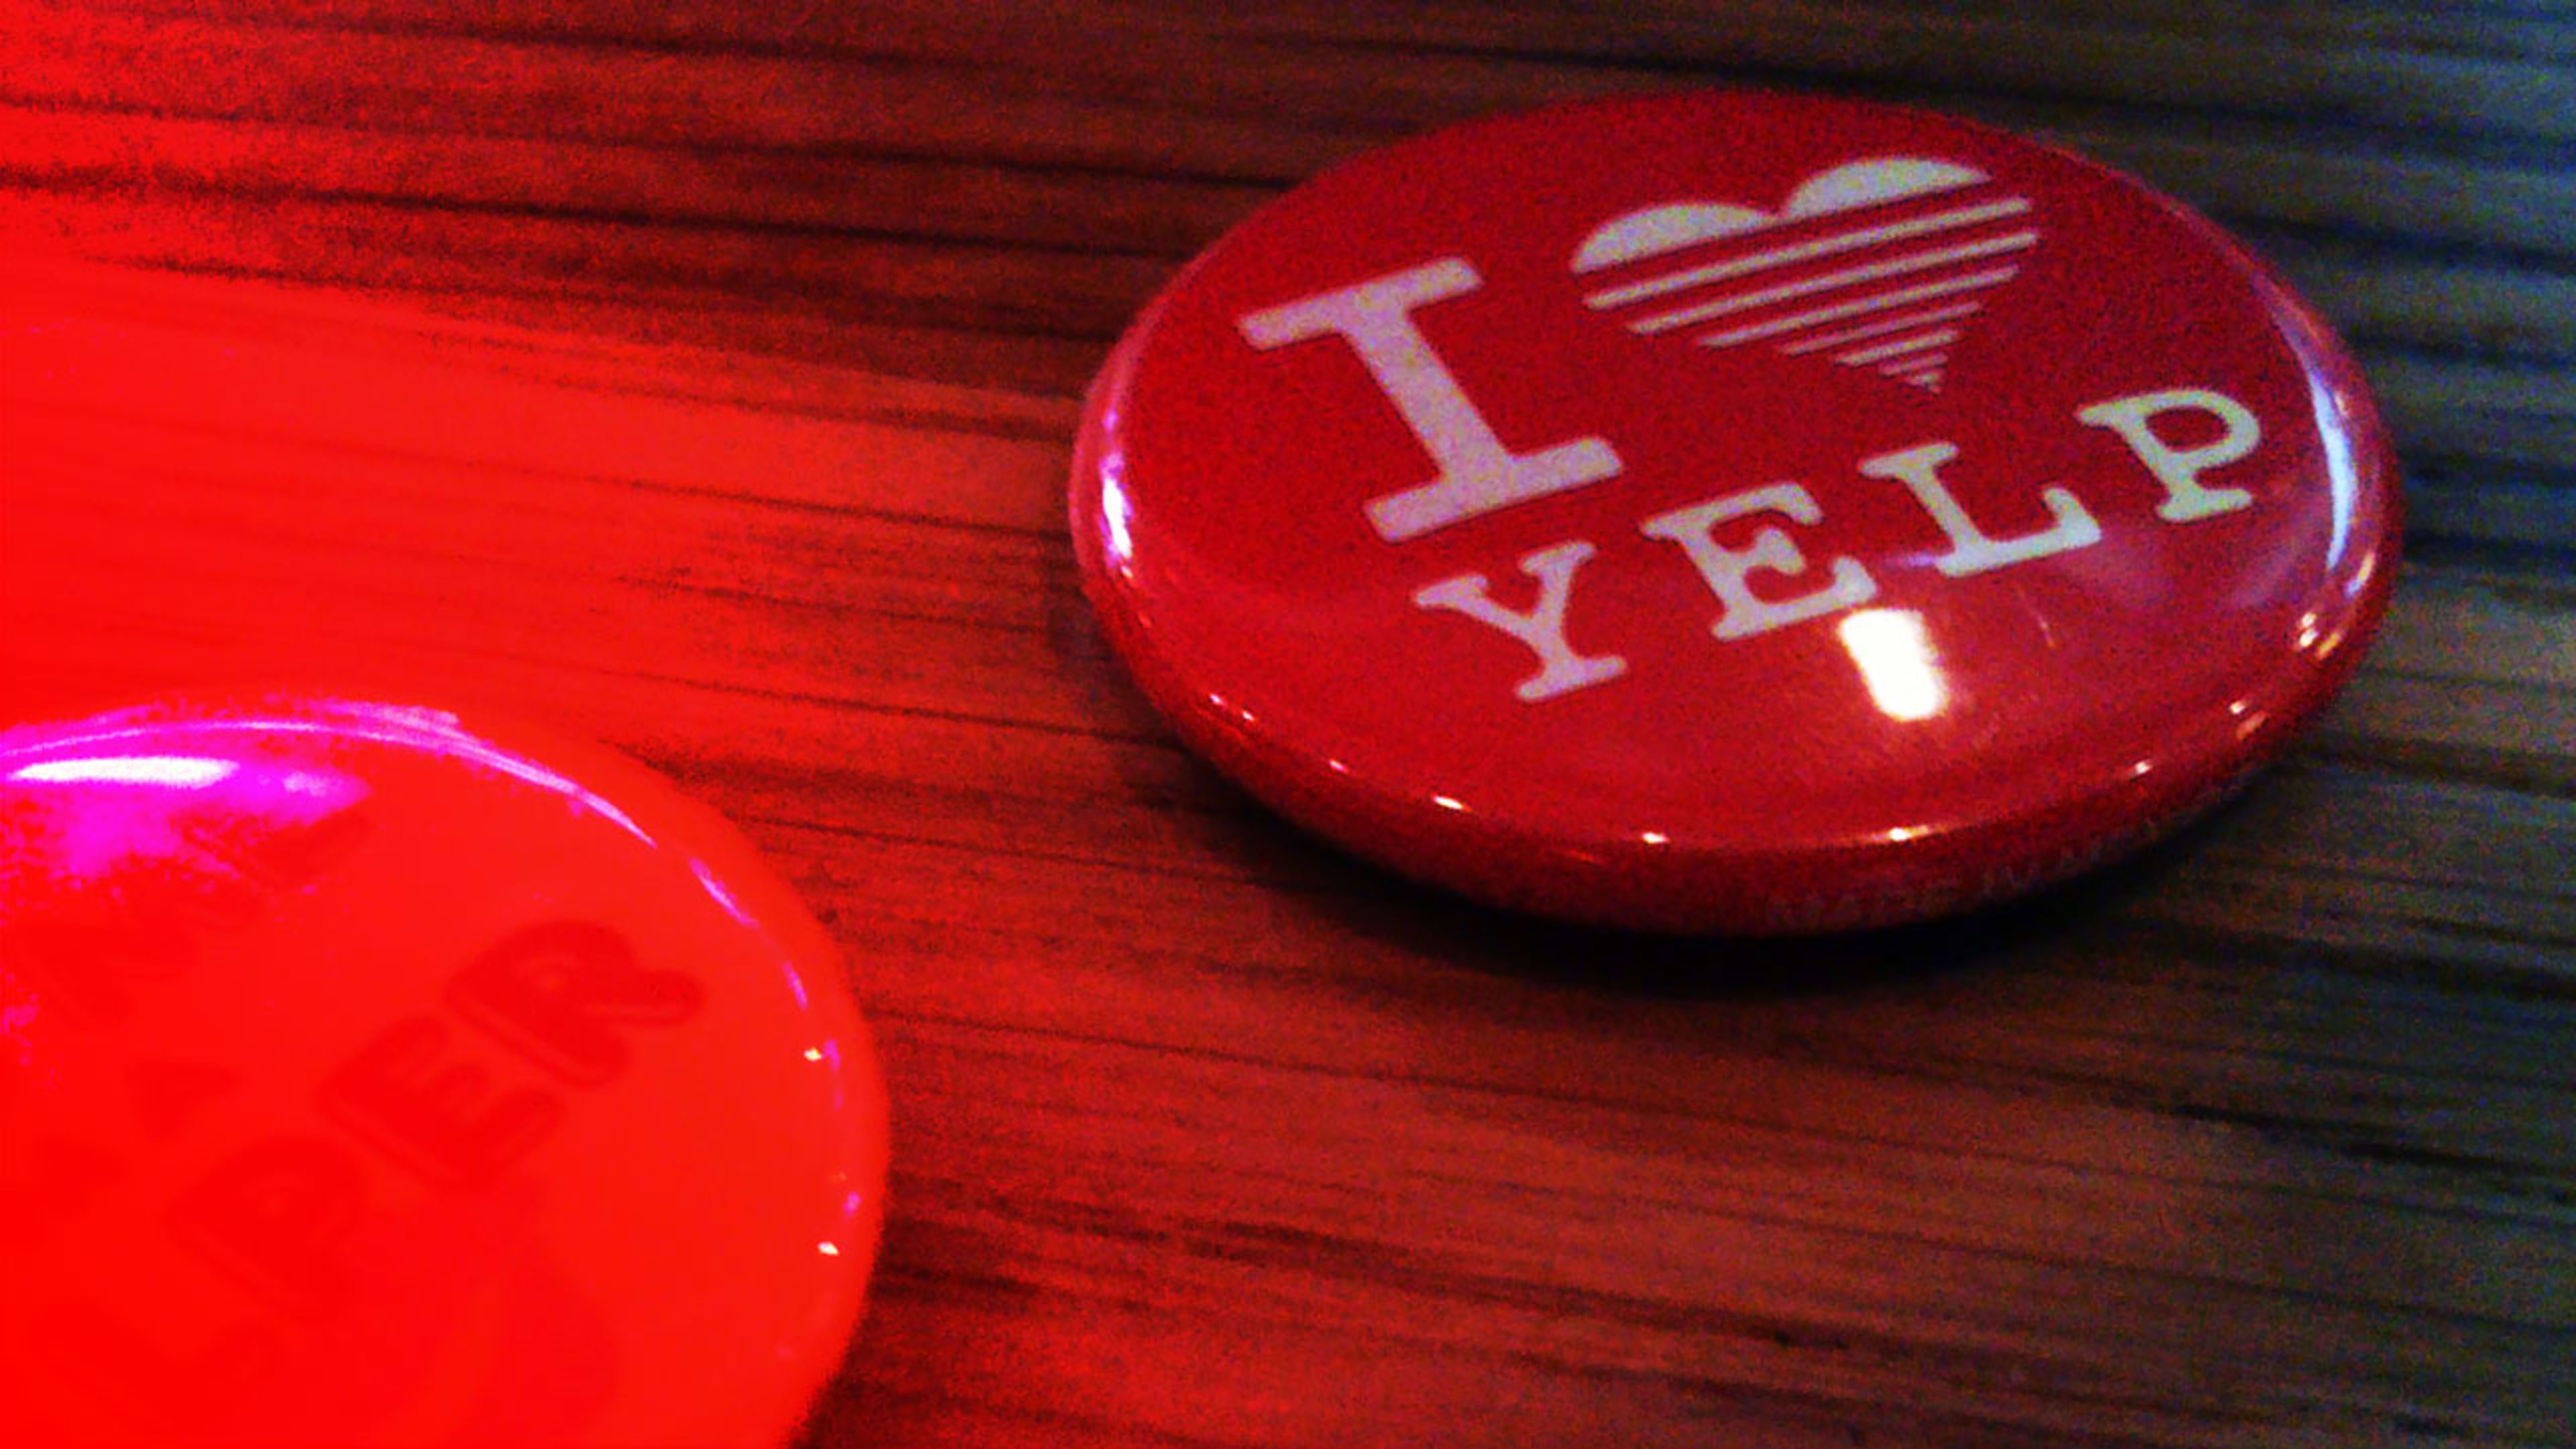 At 15, Yelp finally wants to get to know us better